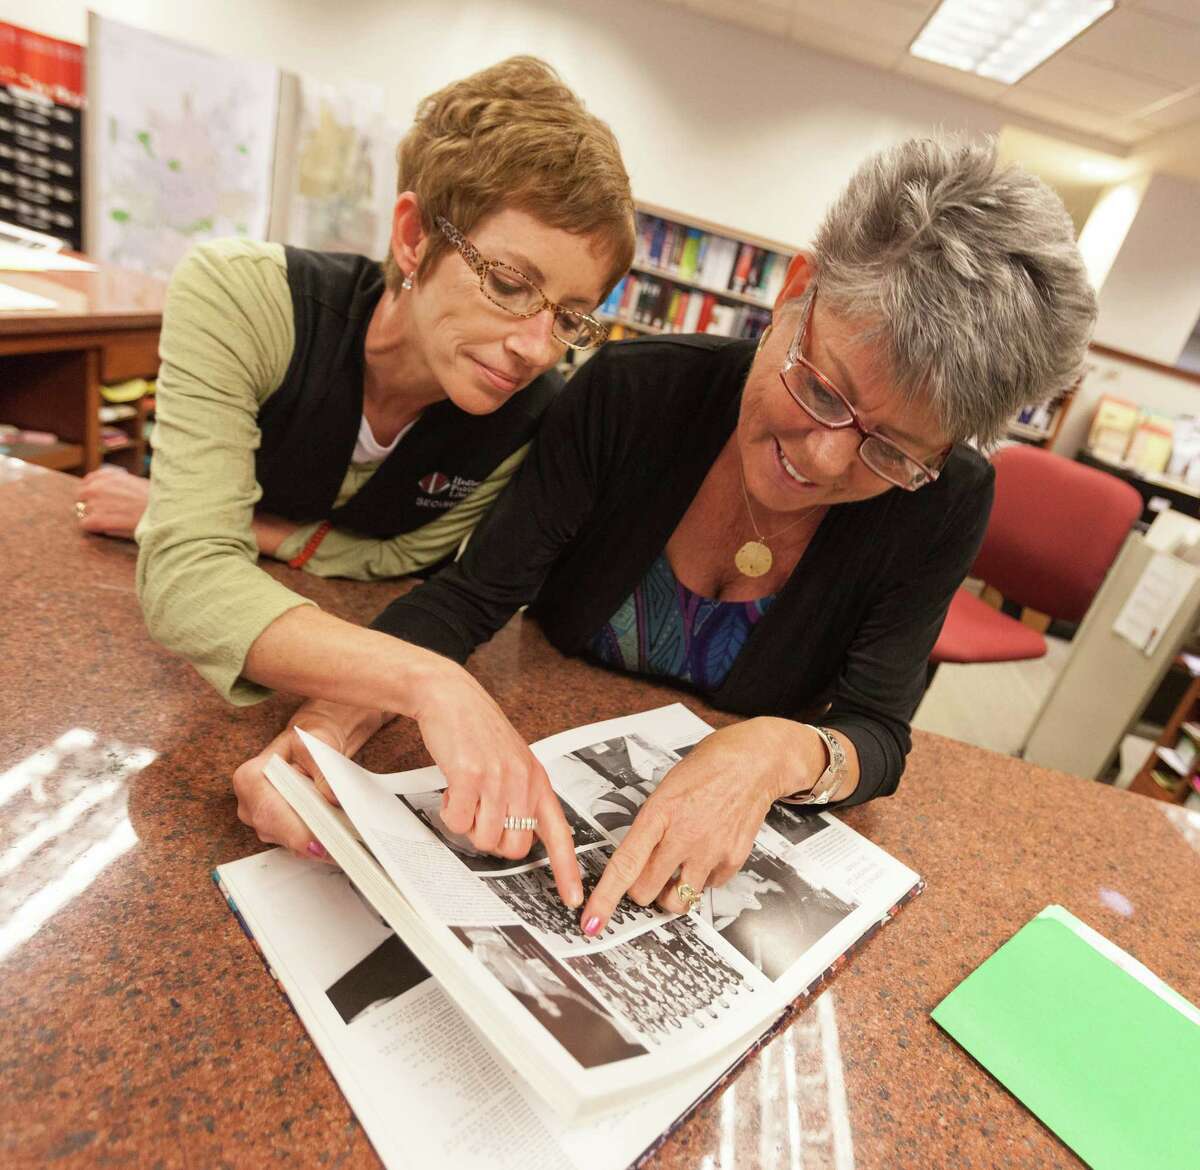 In this photo taken Aug. 12, 2012, librarians Jennifer Spangler, left, and Carolyn Messer, look at photos of Republican Vice Presidential candidate, Rep. Paul Ryan, R-Wis. in his 1988 high school year book at the Janesville Library in Janesville, Wis. A defining moment for Paul Ryan's hometown came at the height of the Great Recession: General Motors, after nearly a century of making Chevrolets on the banks of the Rock River, shut down its oldest assembly plant and erased 6,000 jobs. A defining question for the campaign Paul Ryan joined this week as the Republican Party's vice presidential nominee just might be what comes next for places like Janesville. (AP Photo/Andy Manis)